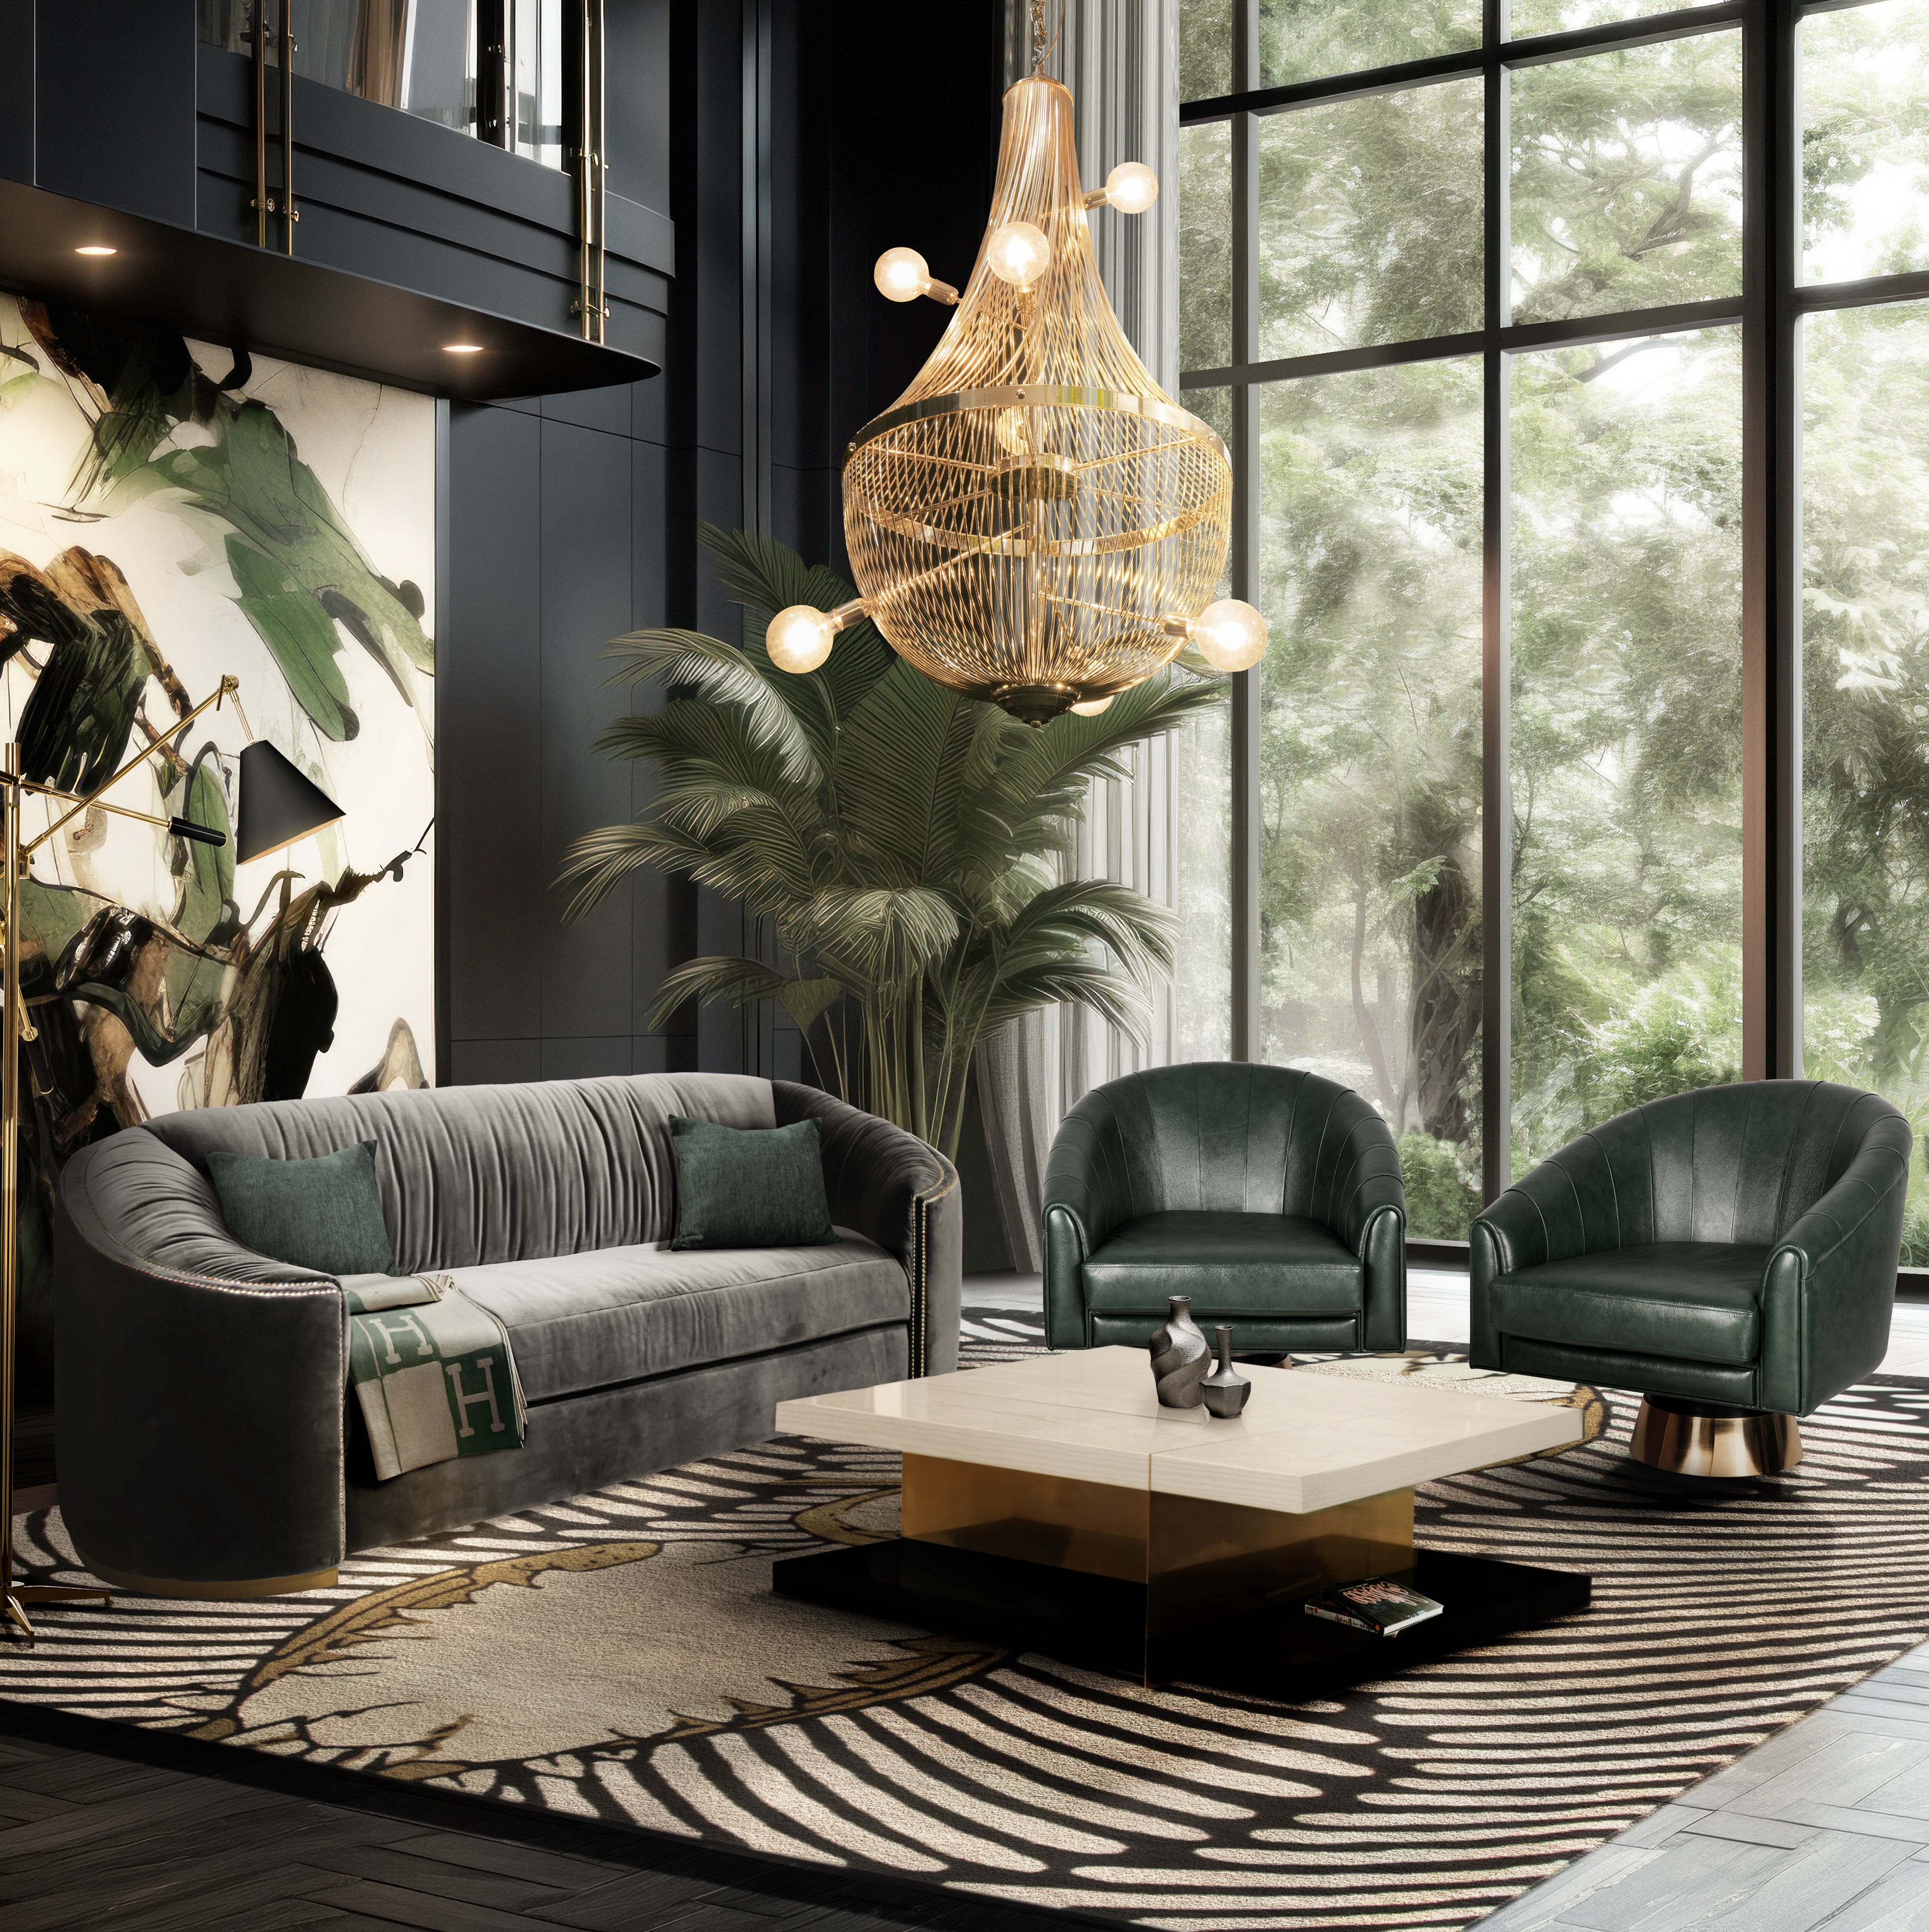 Living Room Design in Green Tones - Home'Society